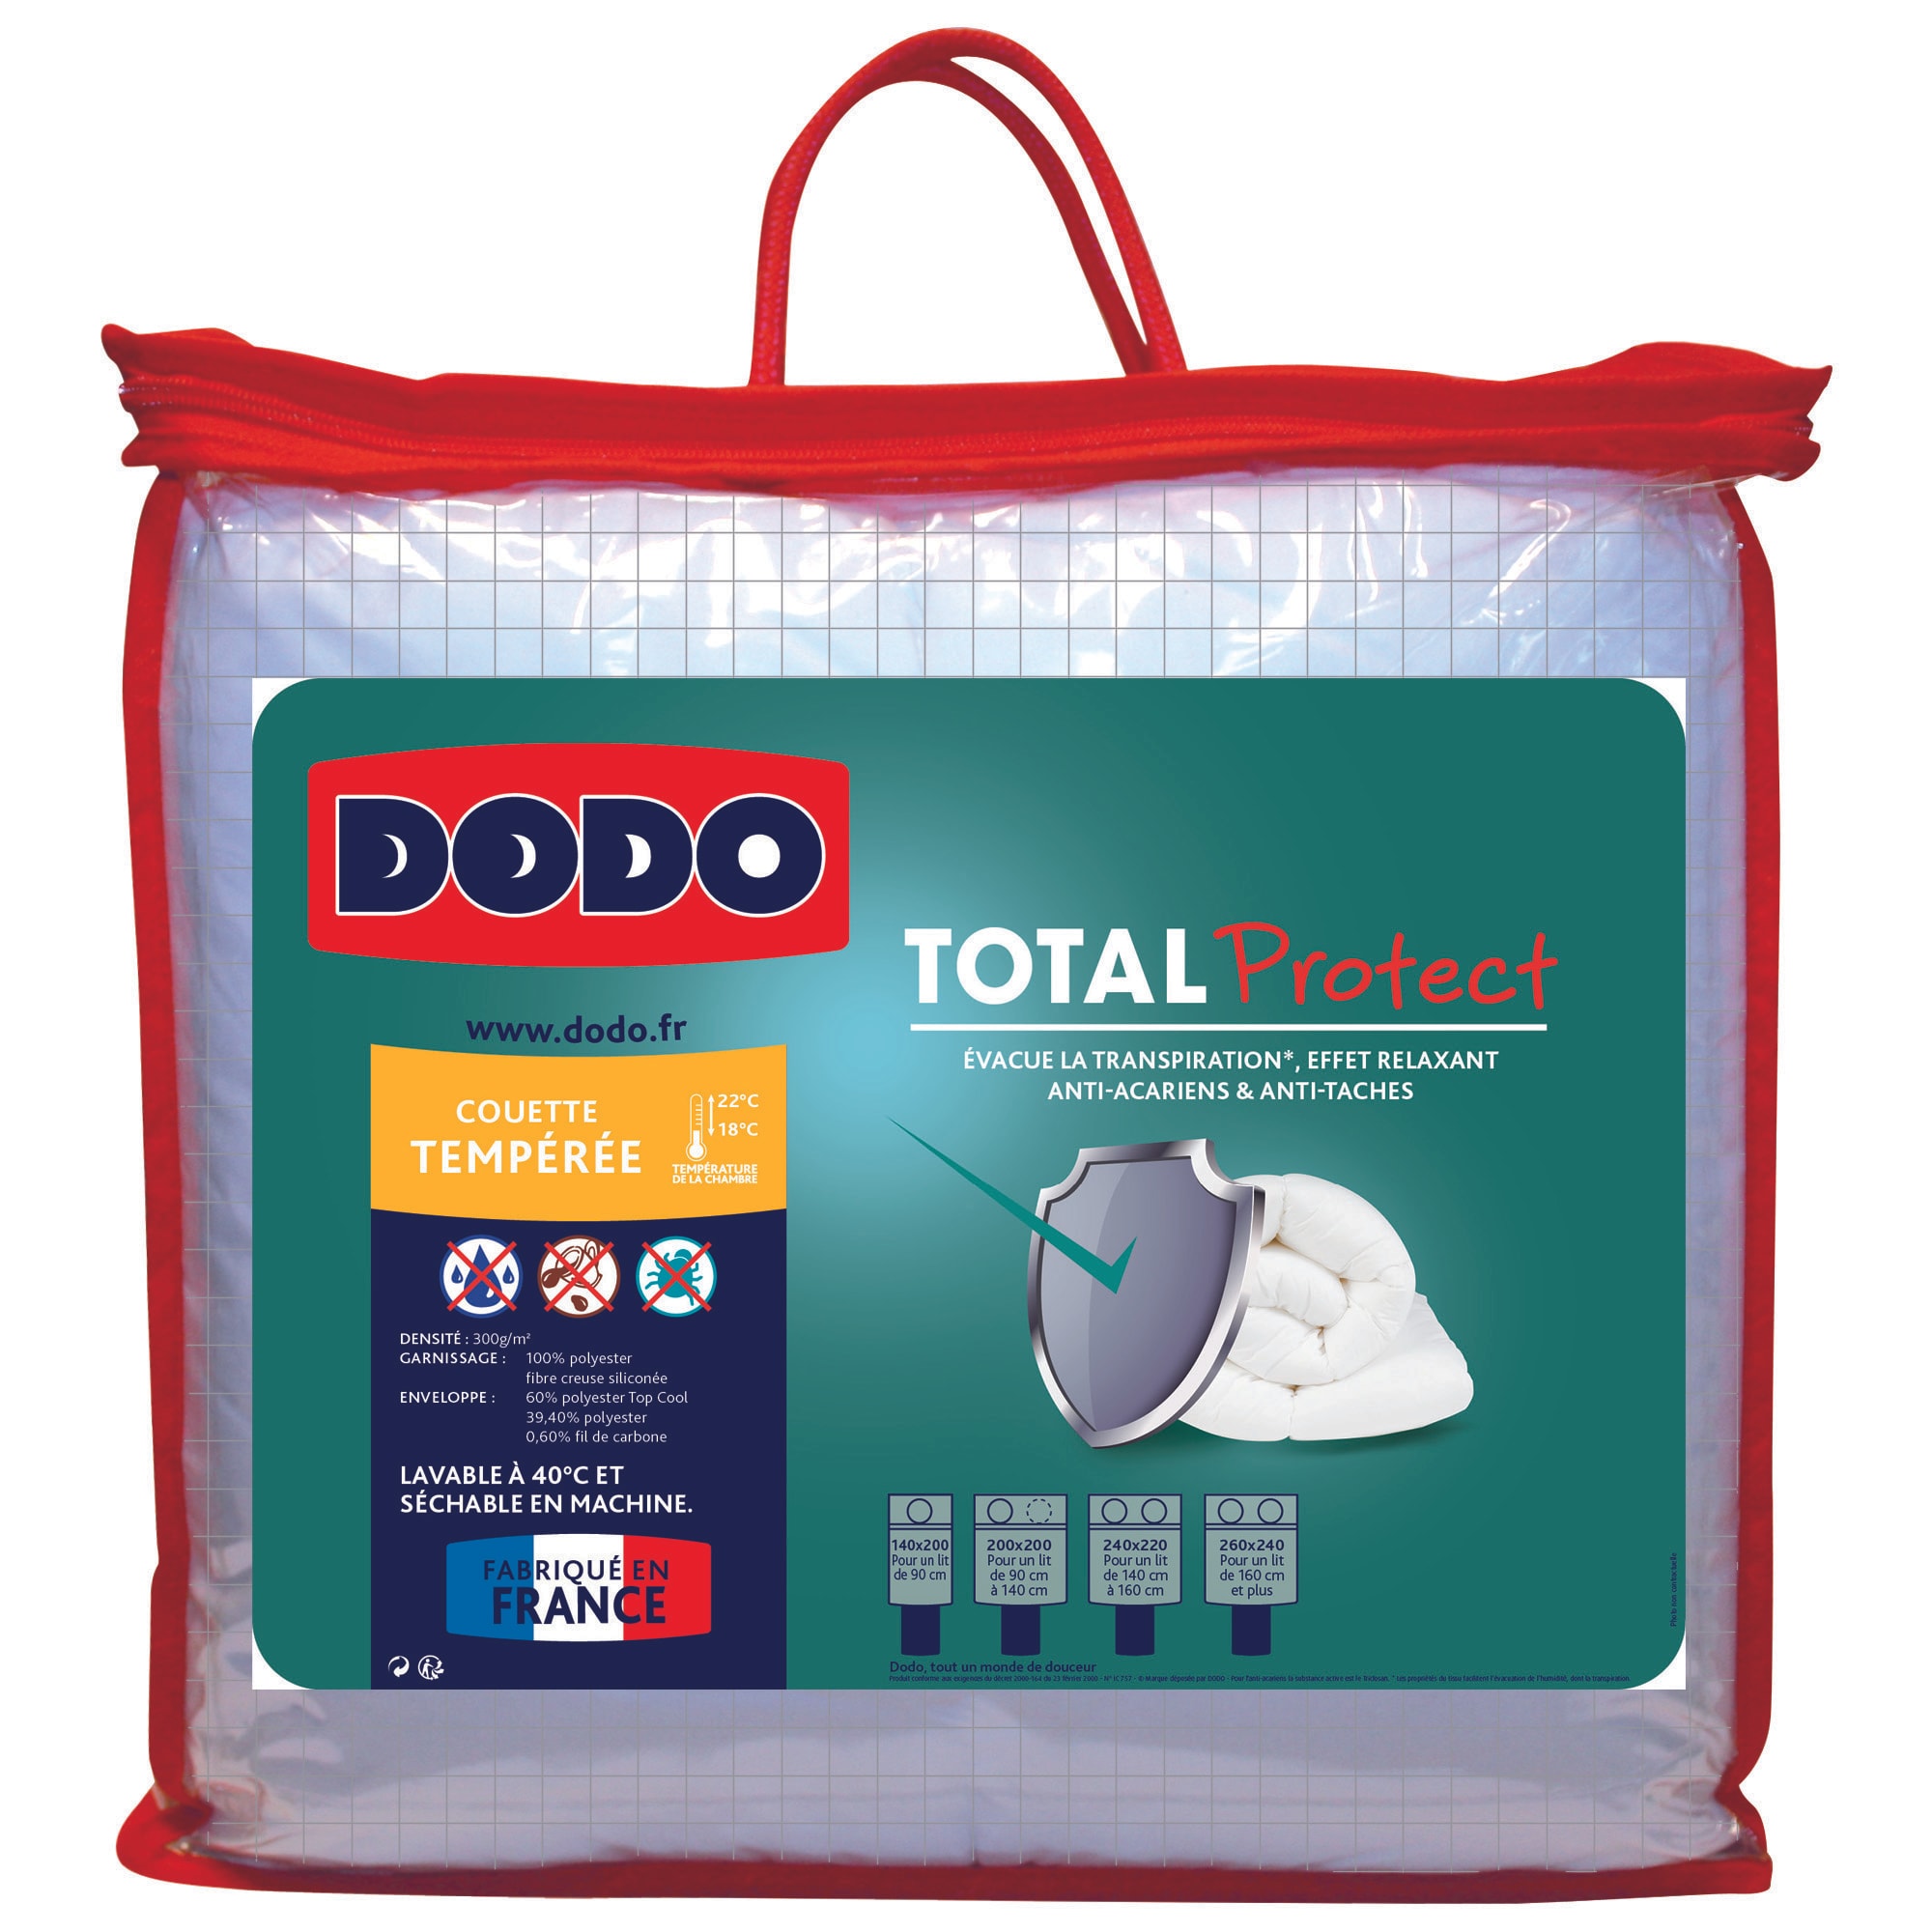 Couette DODO Total protect 200x200 Pas Cher 